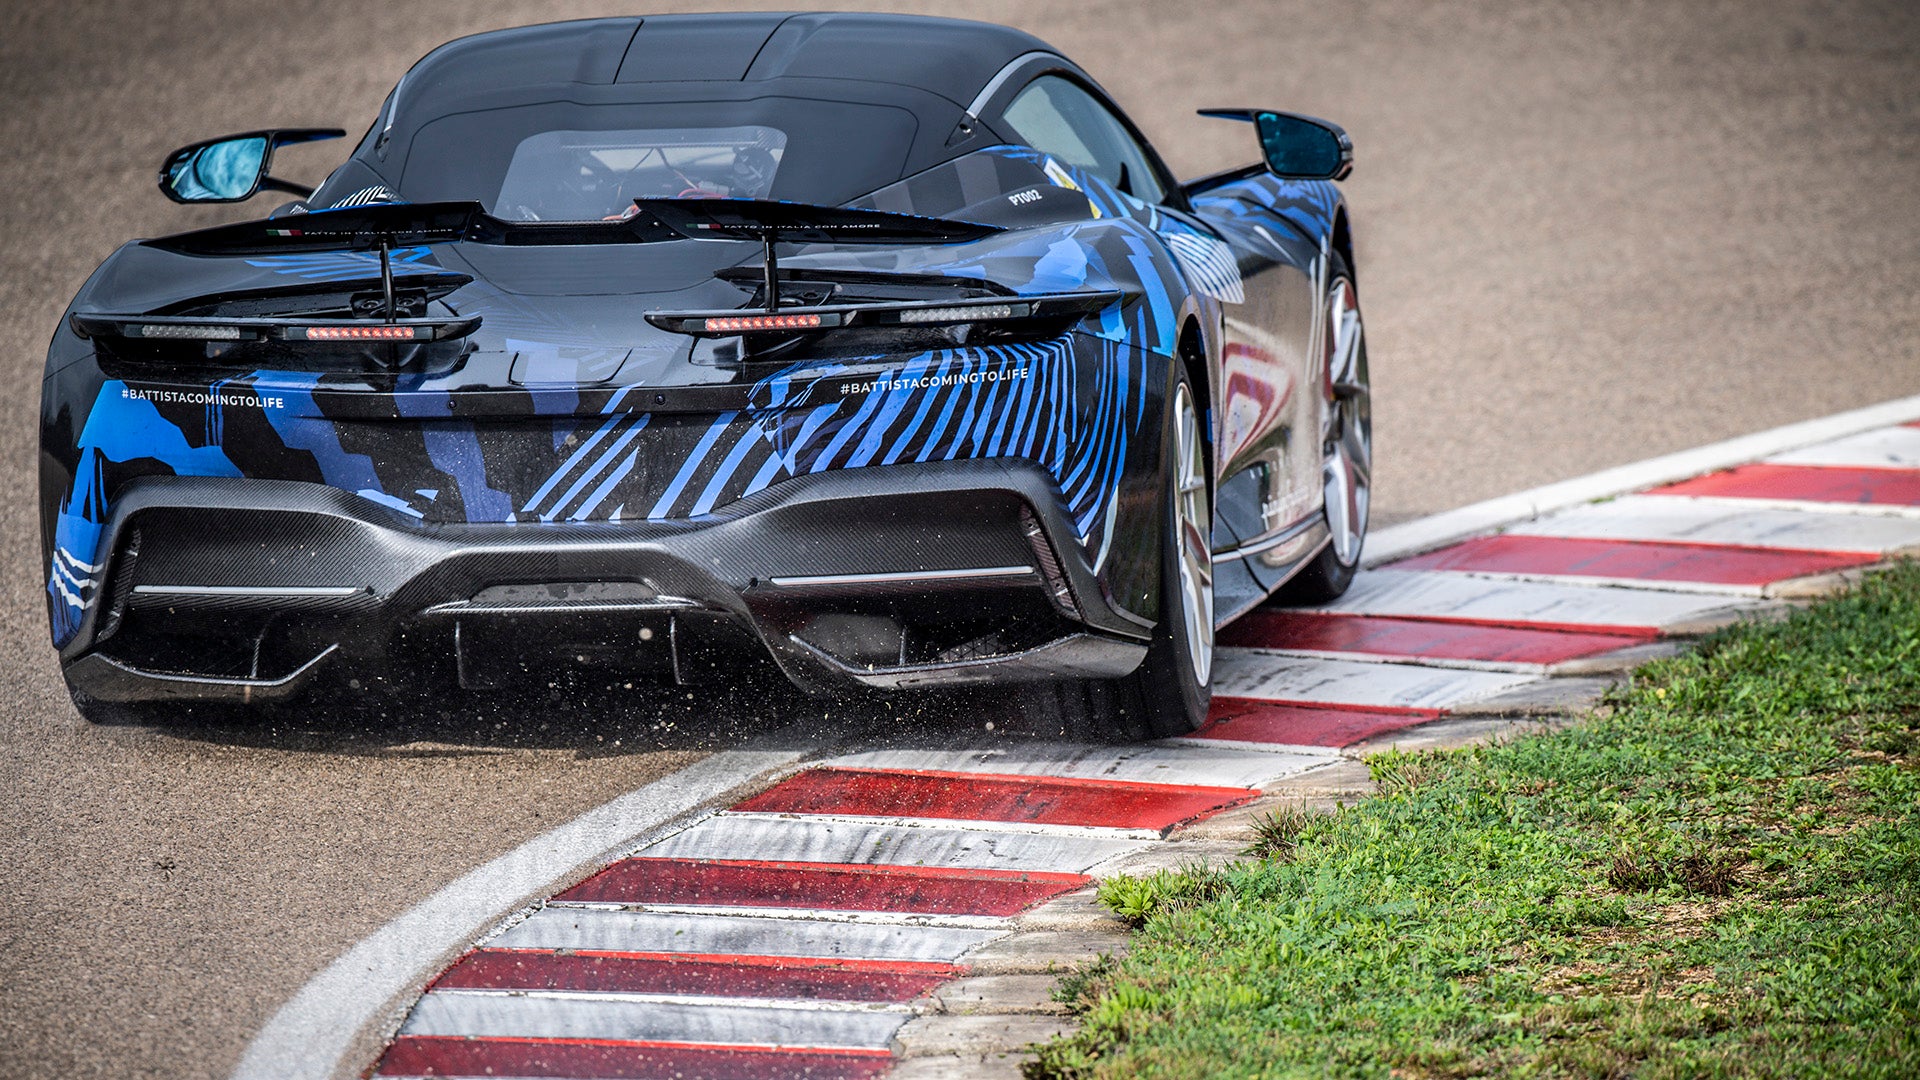 1,900-HP Pininfarina Battista Electric Hypercar Hits the Test Track With a Former F1 Driver